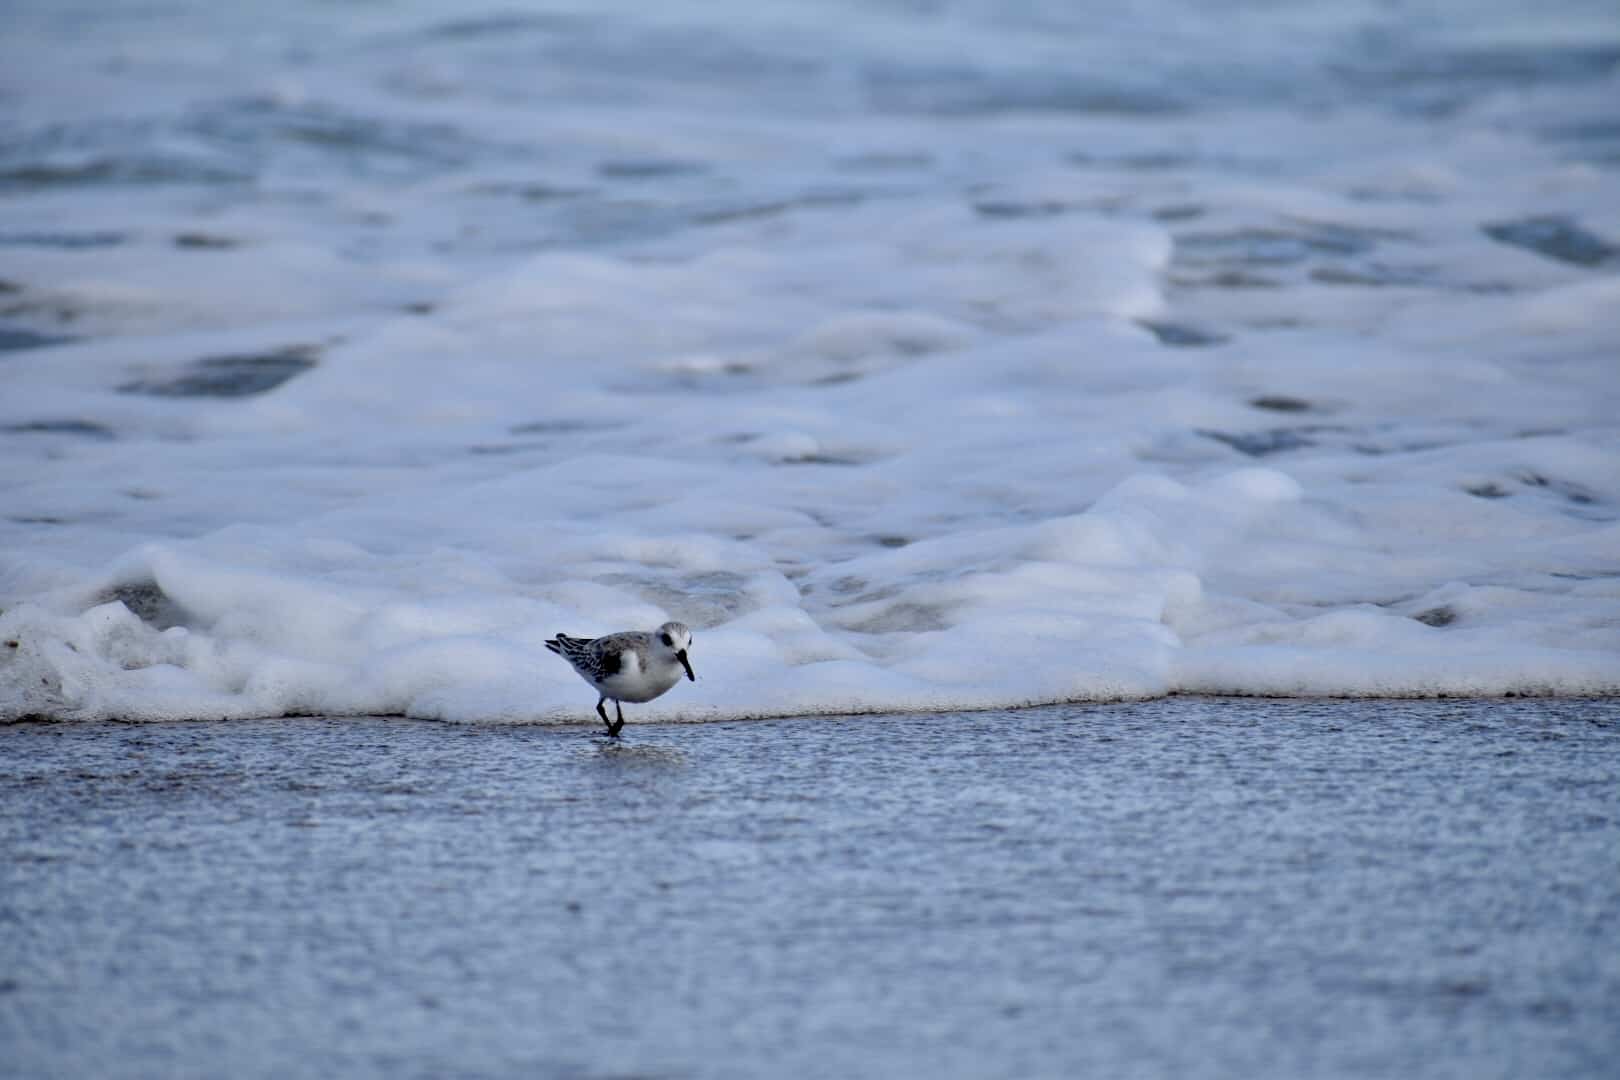 photo of a bird walking towards the camera with a wave approaching from behind